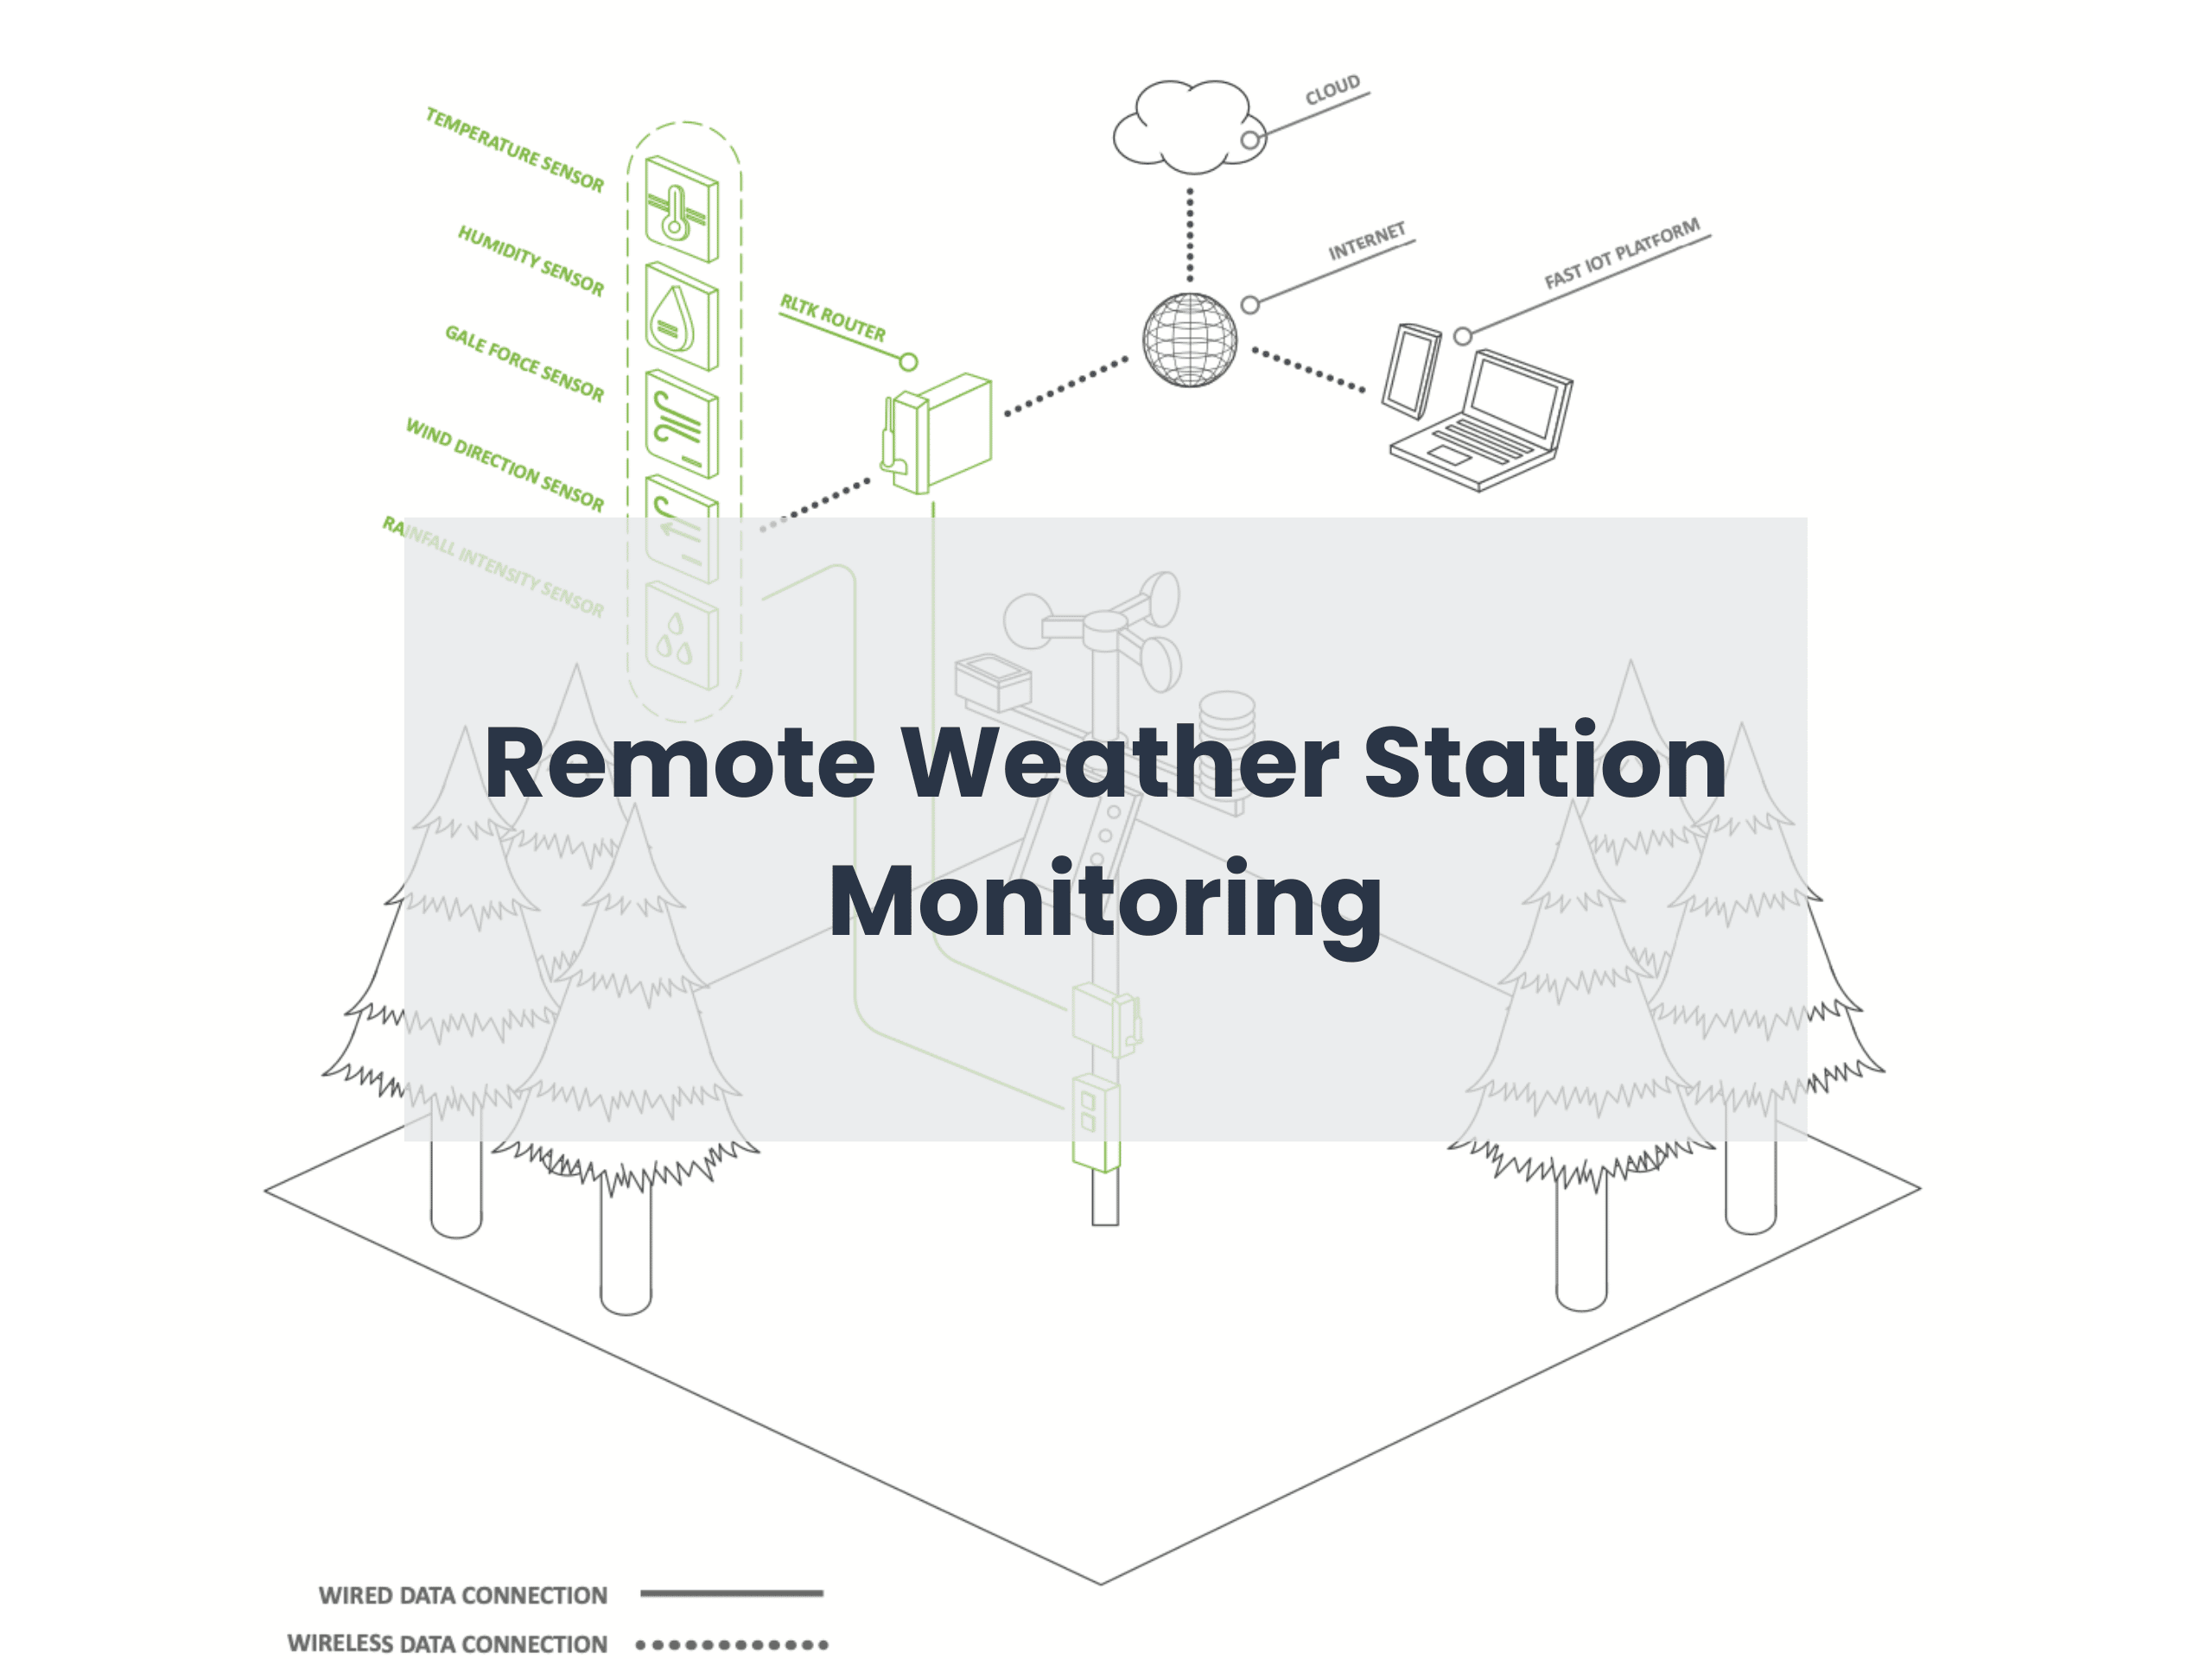 Remote Weather Station Monitoring